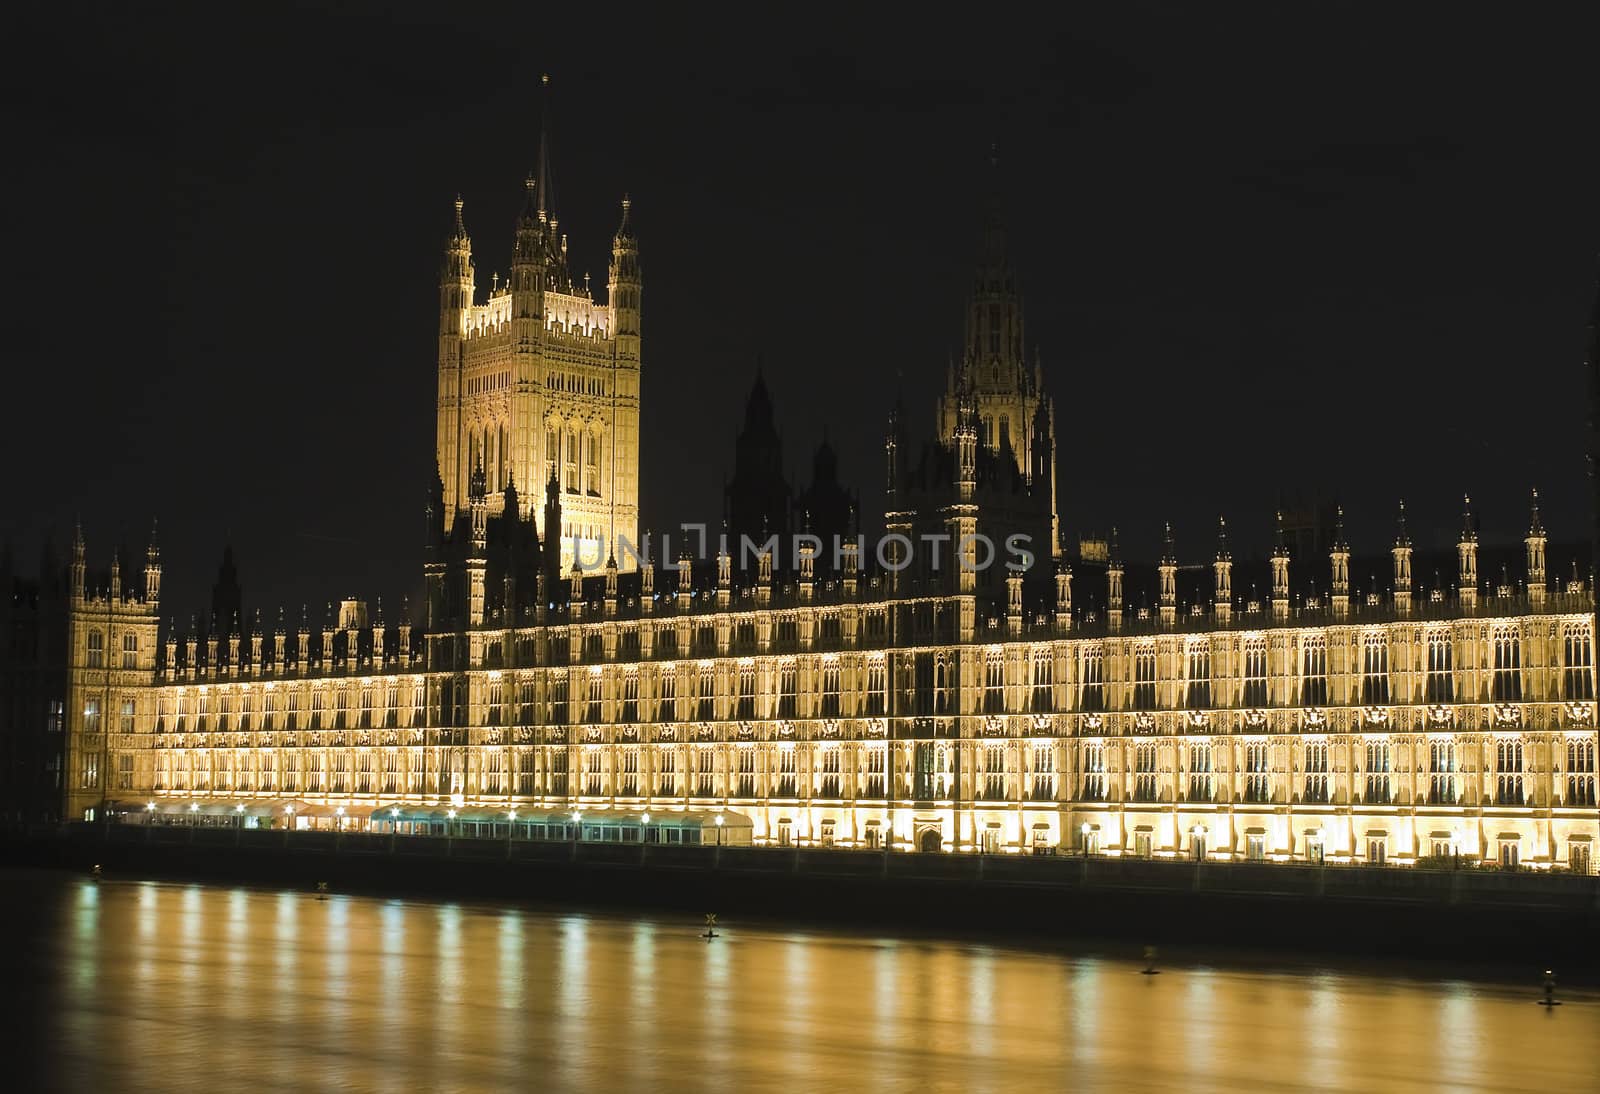 The Houses of Parliament in London illuminated at night